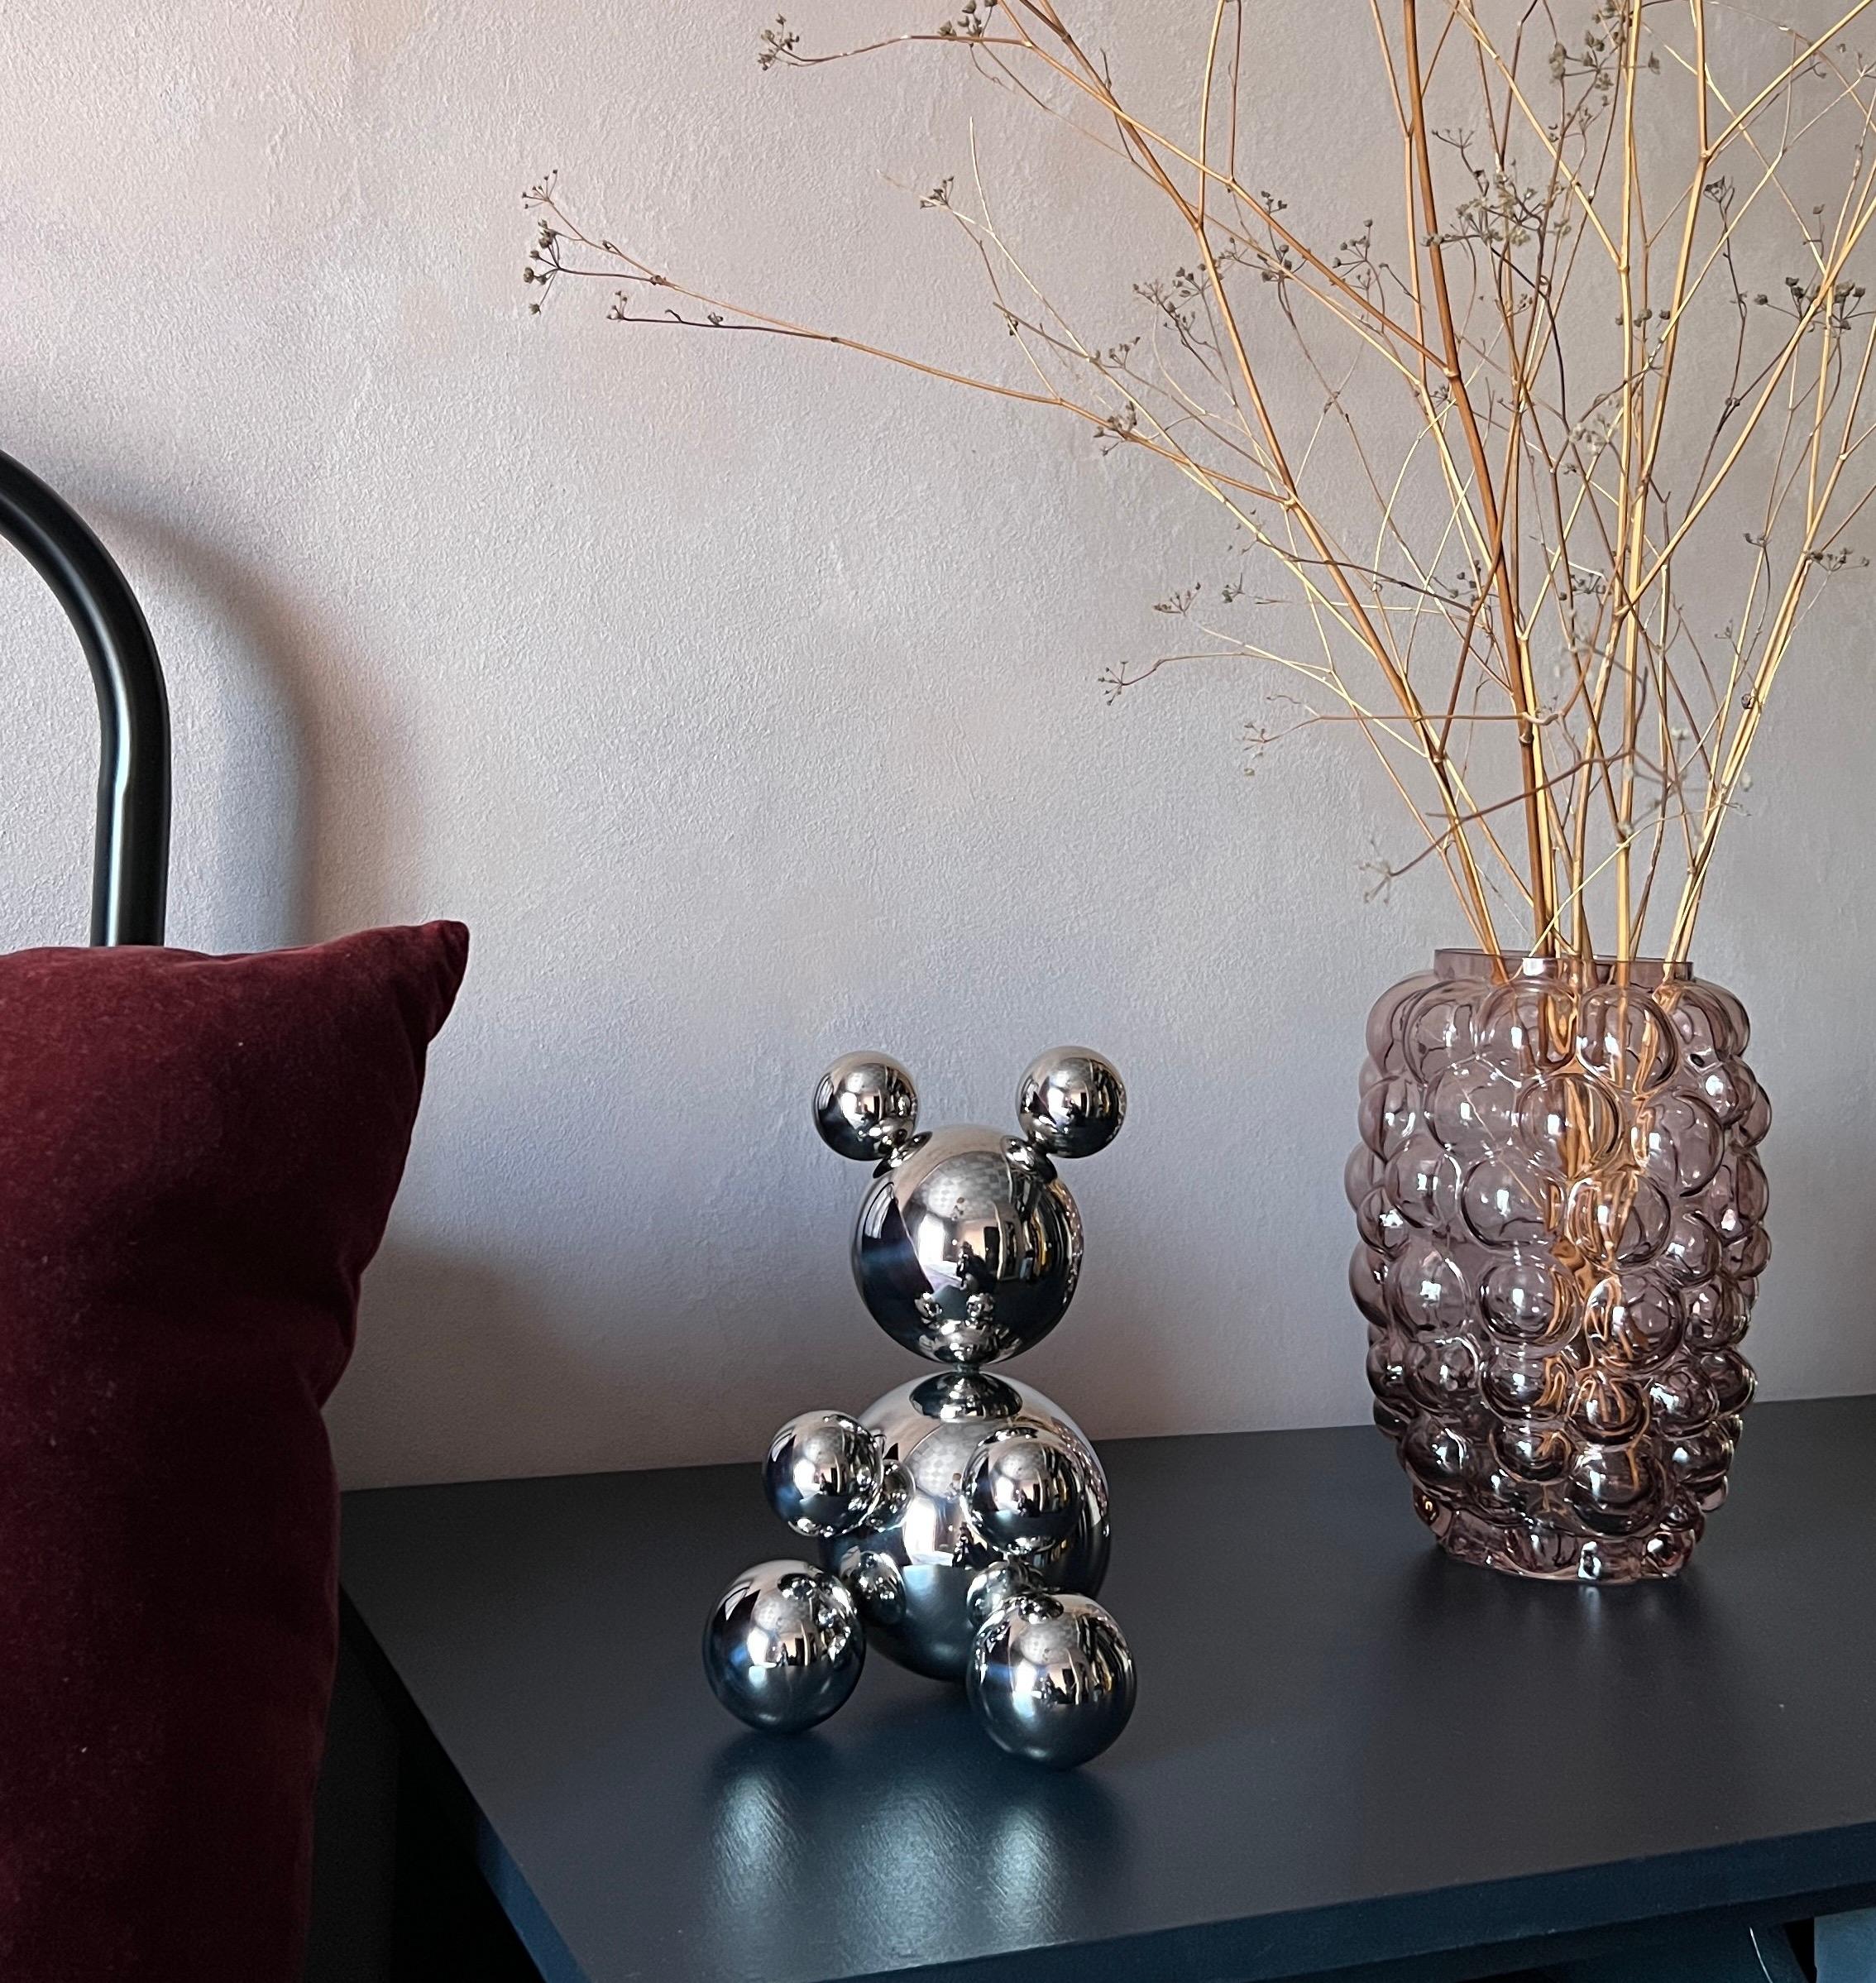 Small Stainless Steel Bear 'Kerry' Sculpture Minimalistic Animal - Black Figurative Sculpture by IRENA TONE